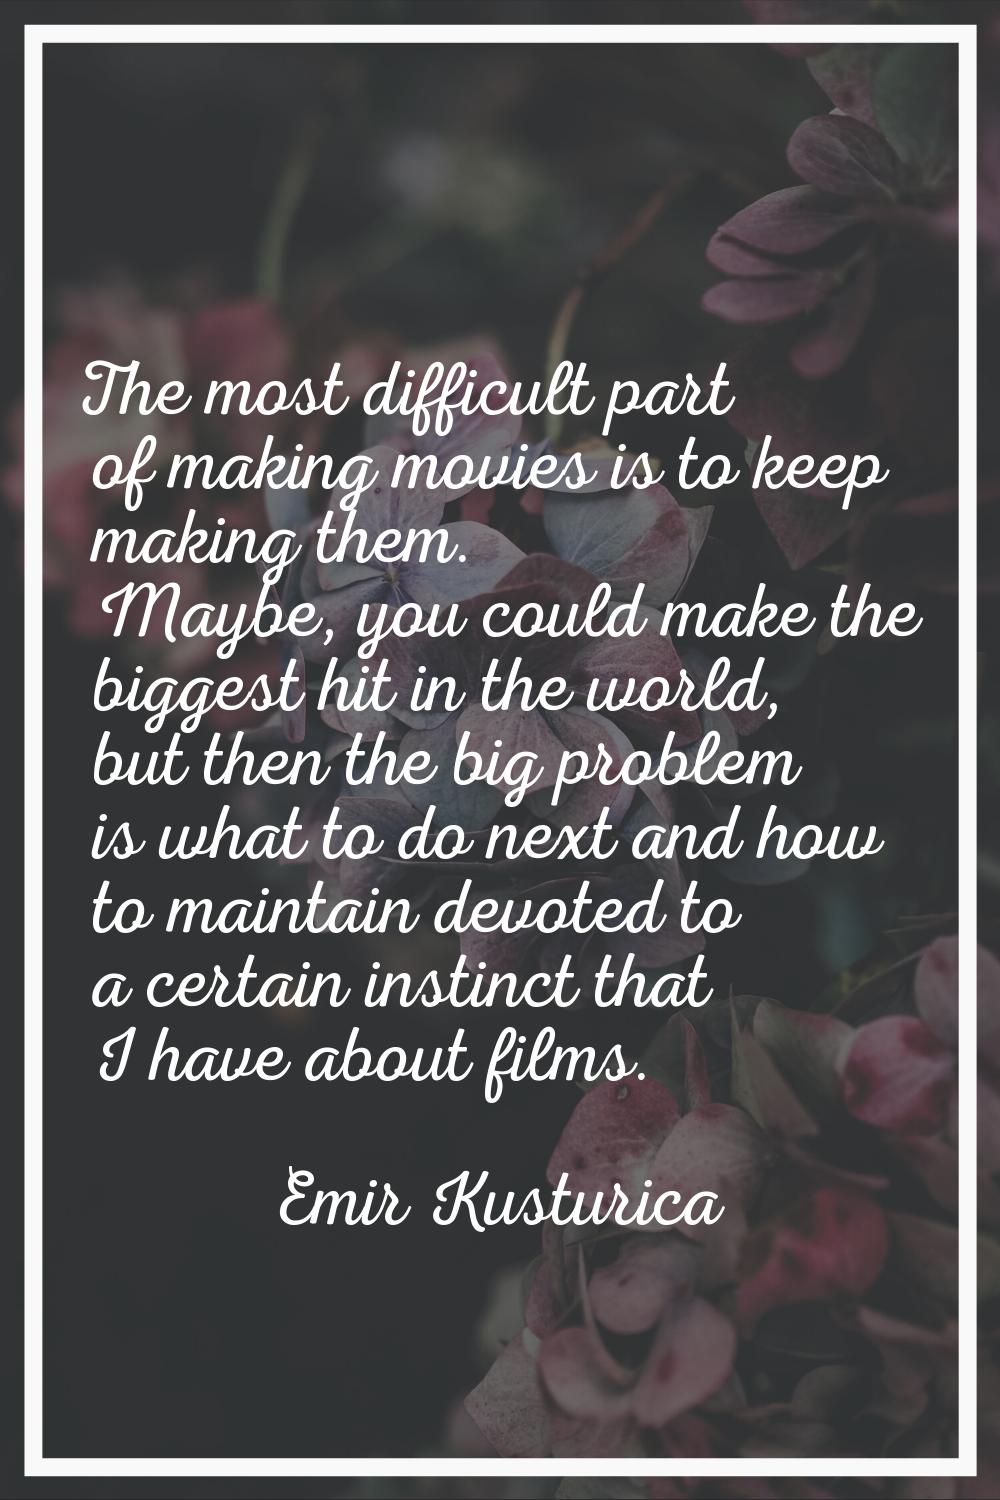 The most difficult part of making movies is to keep making them. Maybe, you could make the biggest 